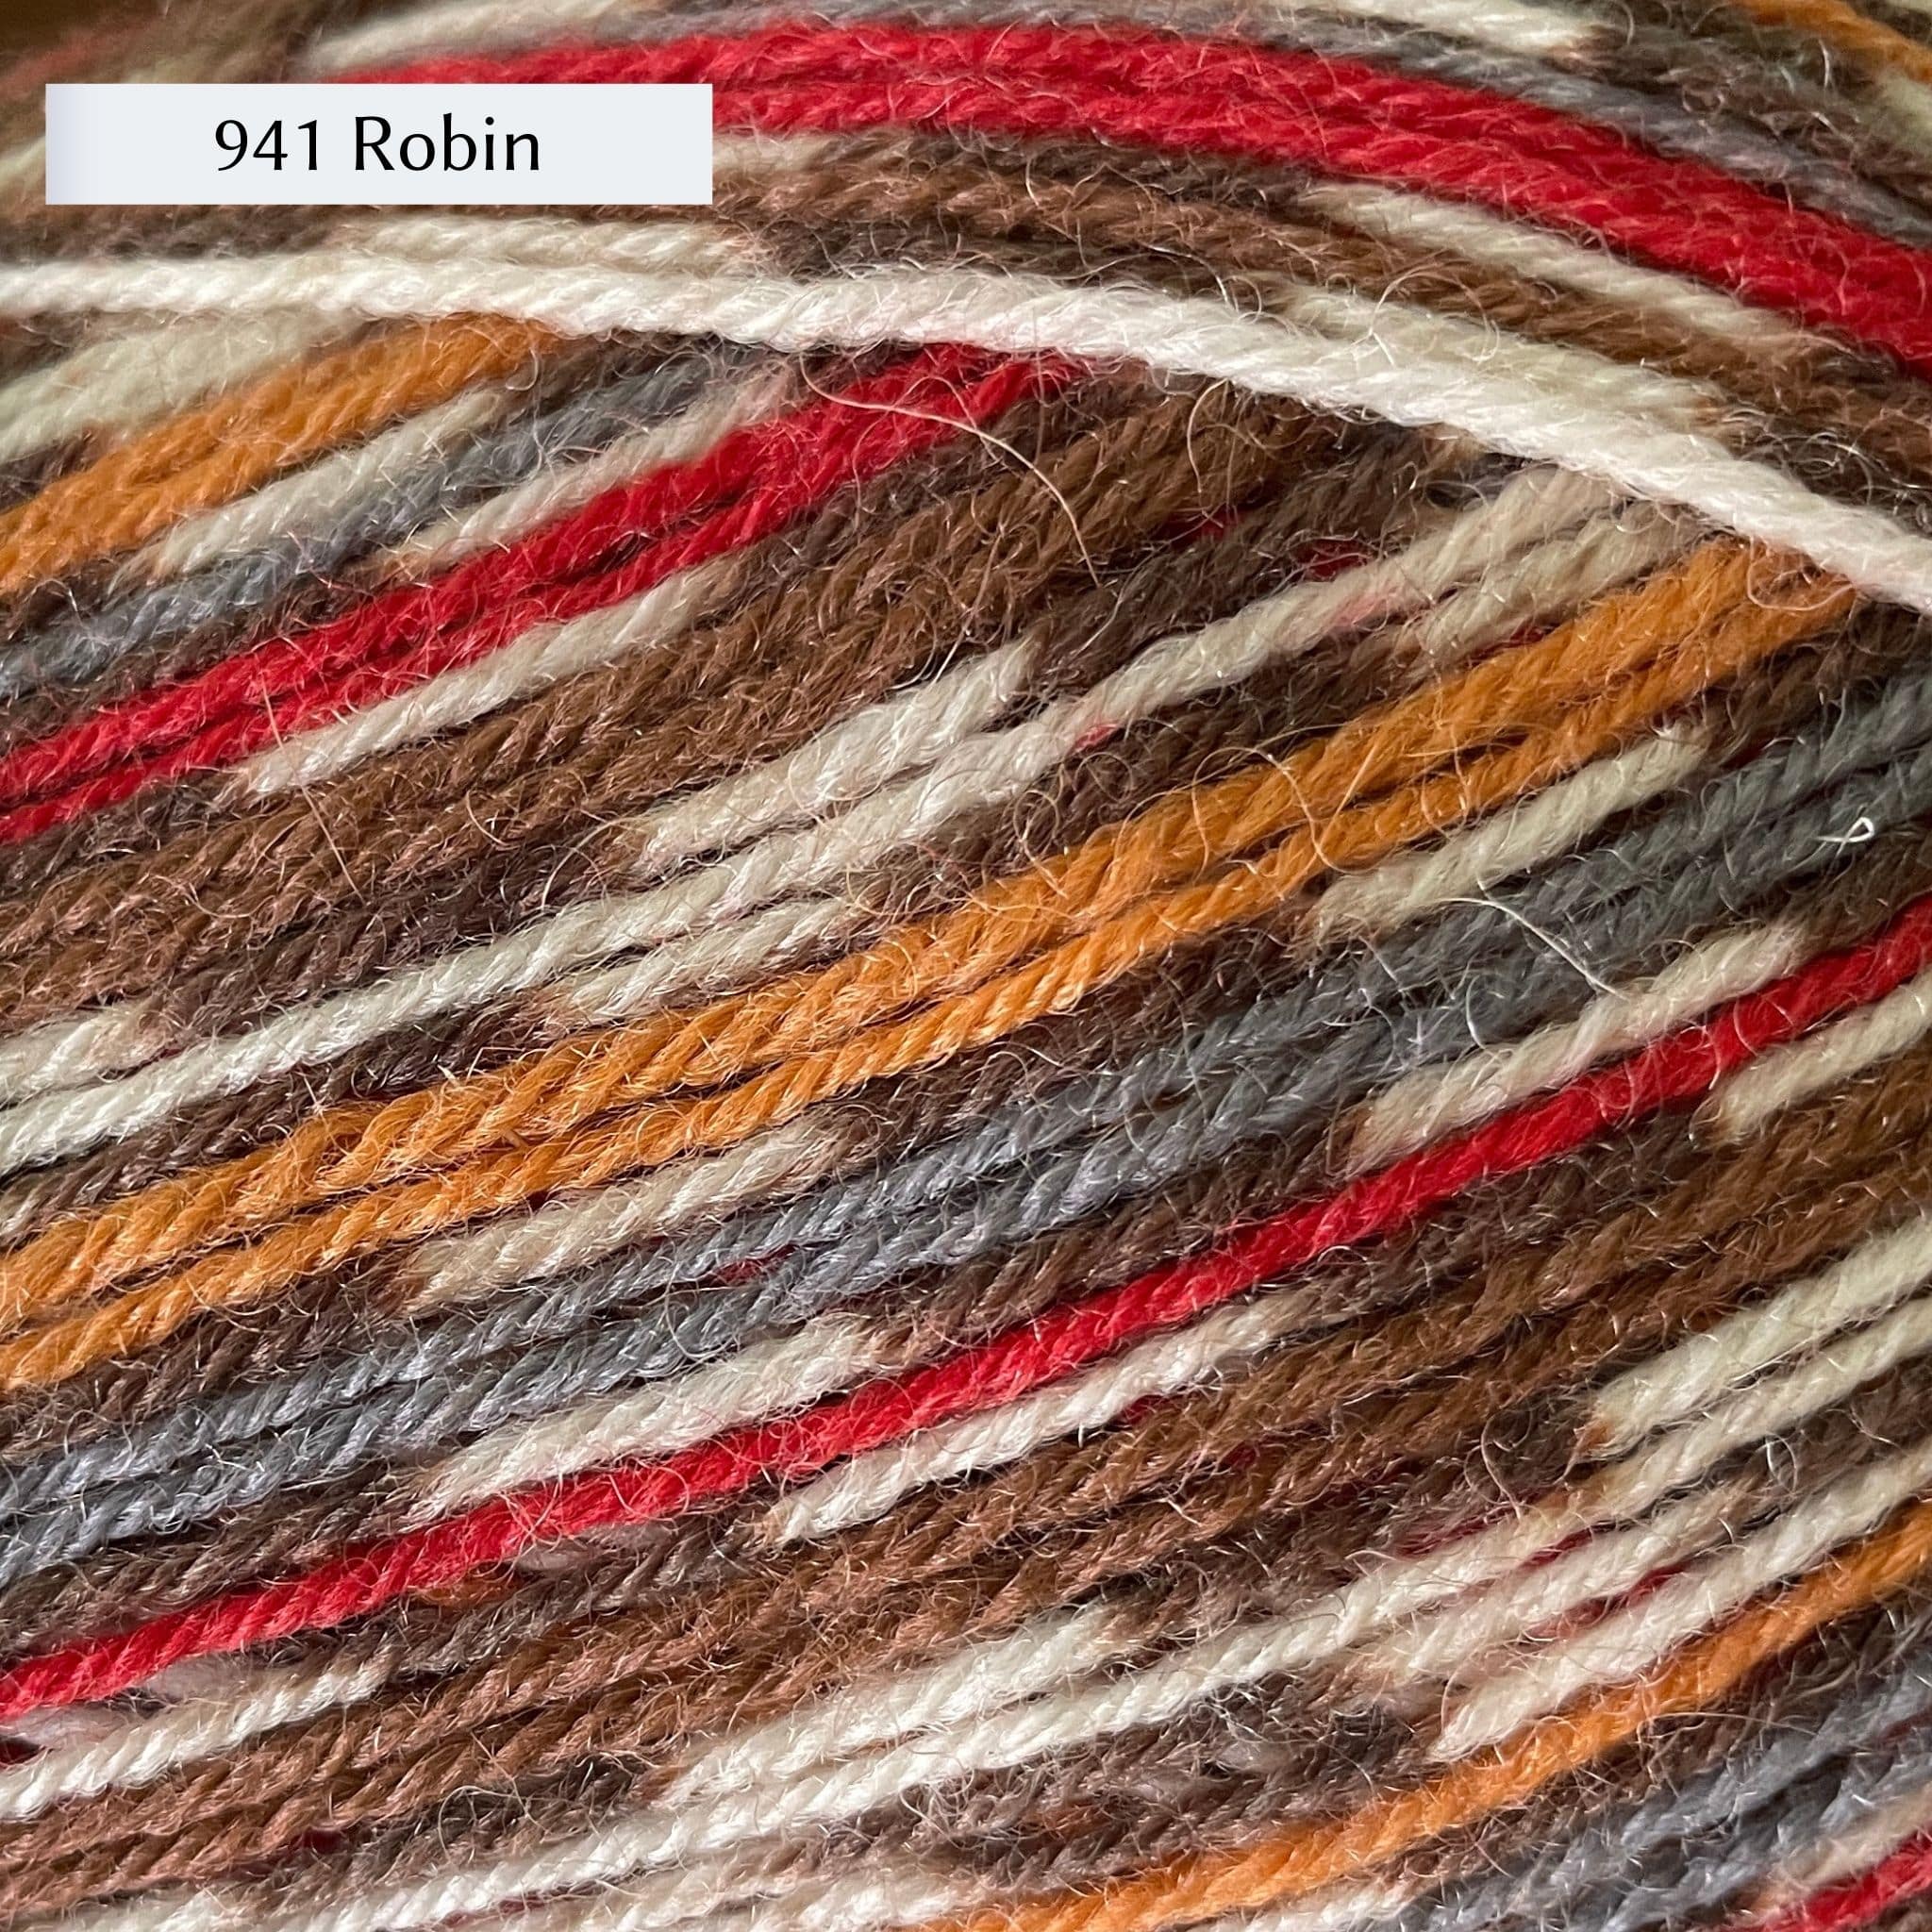 West Yorkshire Spinners Signature 4ply yarn, fingering weight, in color 941 Robin, a bird-inspired colorway with red, white, copper, brown and steel grey, and a self-patterning section of brown and white